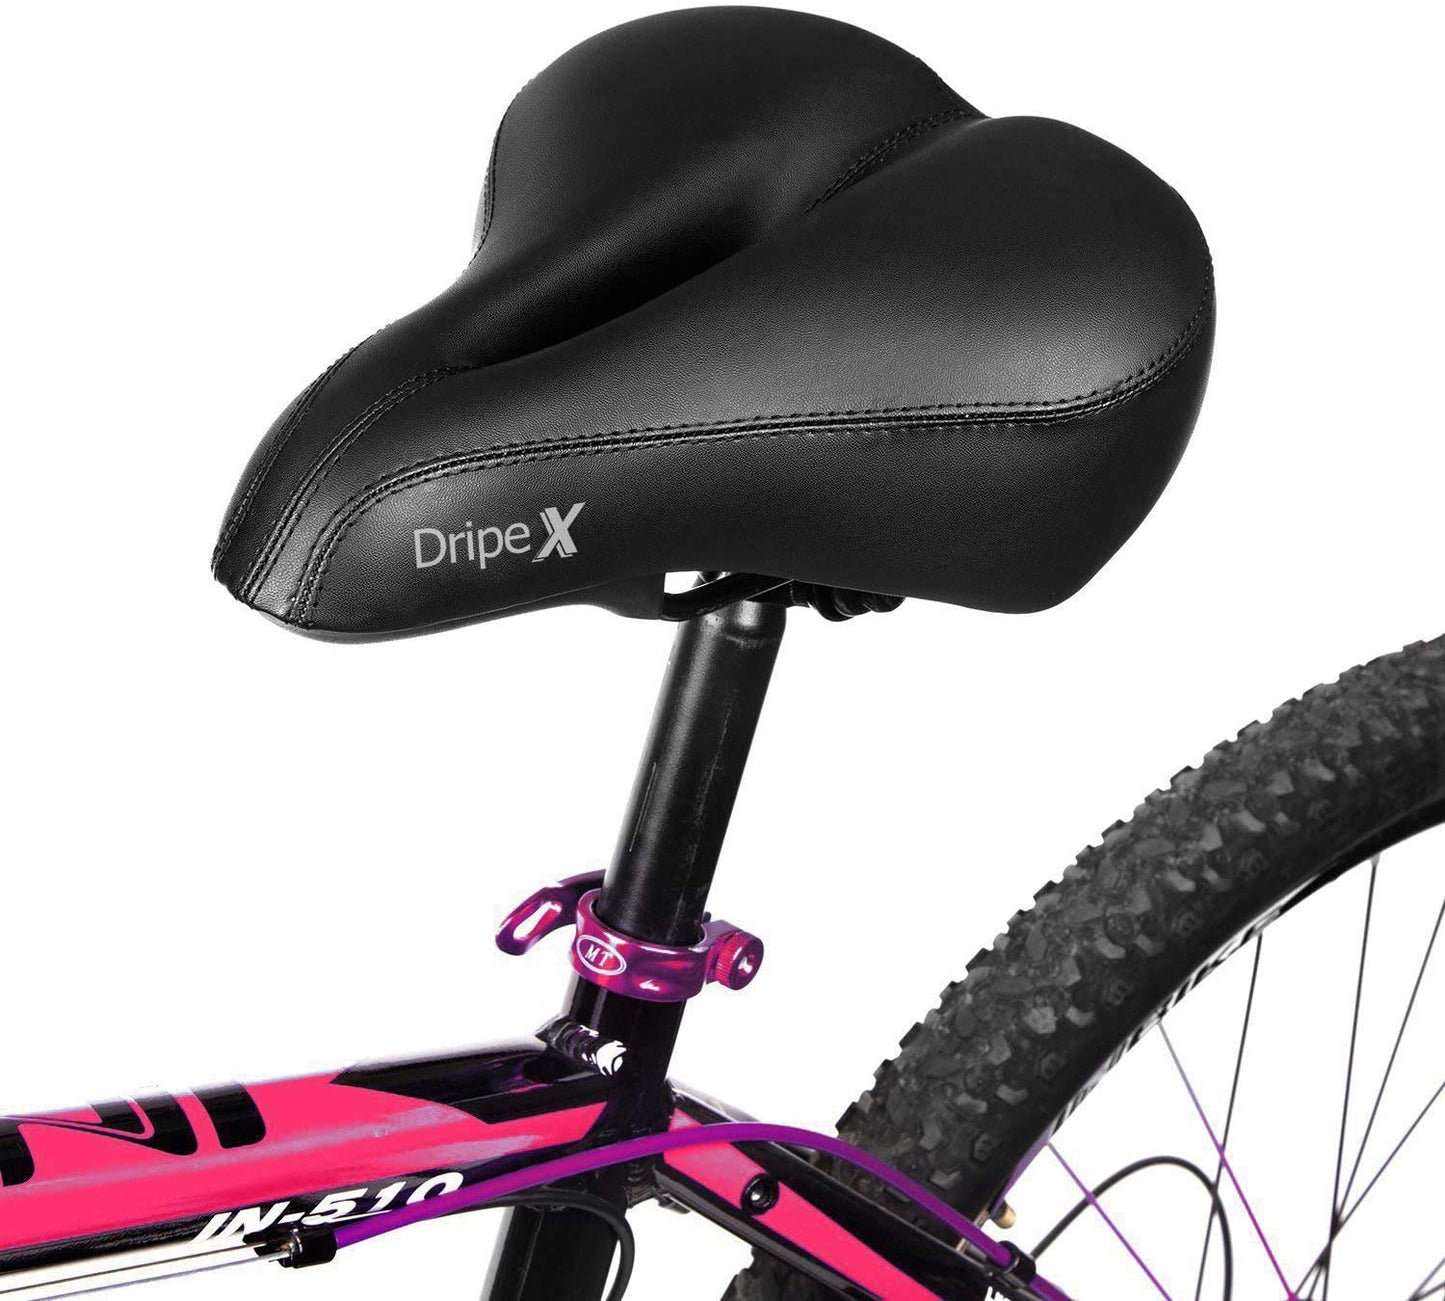 Find helpful customer reviews and review ratings for Dripex Gel Bike Seat Bicycle Saddle - Comfort Cycle Saddle Wide Cushion Pad Waterproof for Women Men